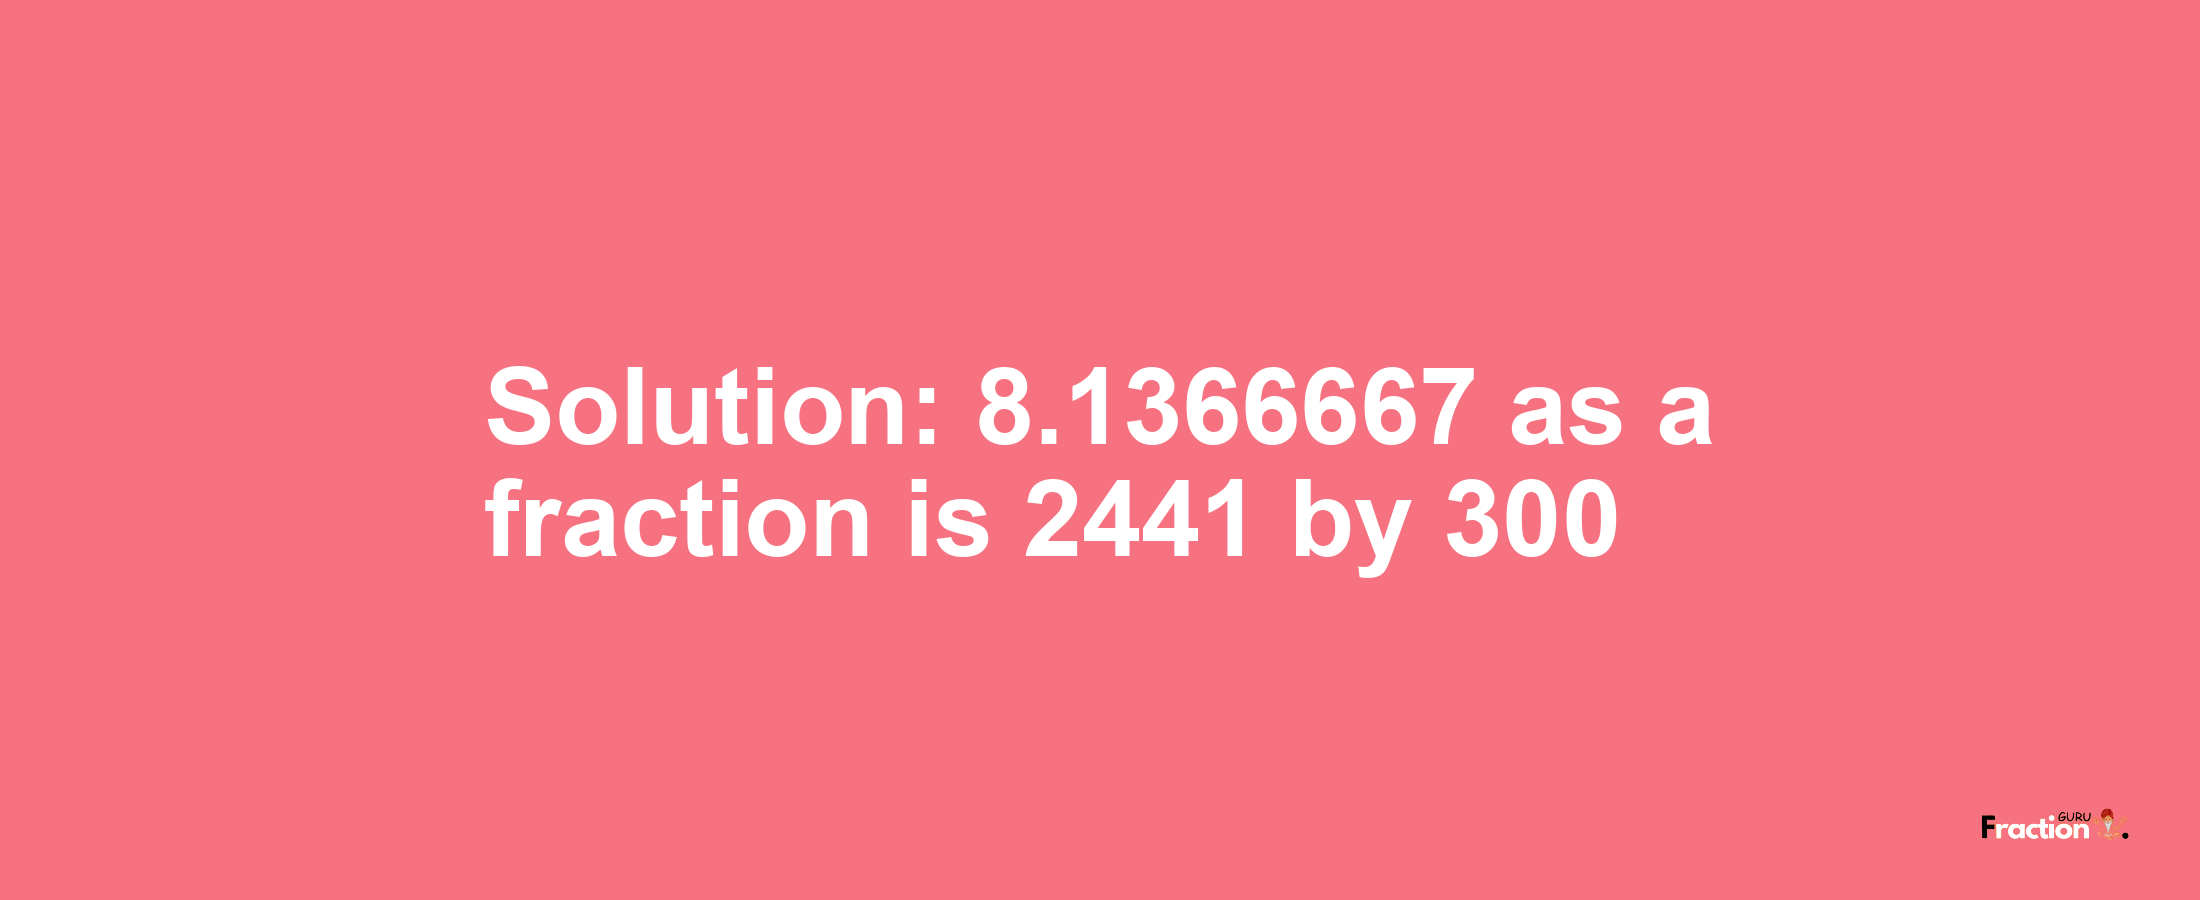 Solution:8.1366667 as a fraction is 2441/300